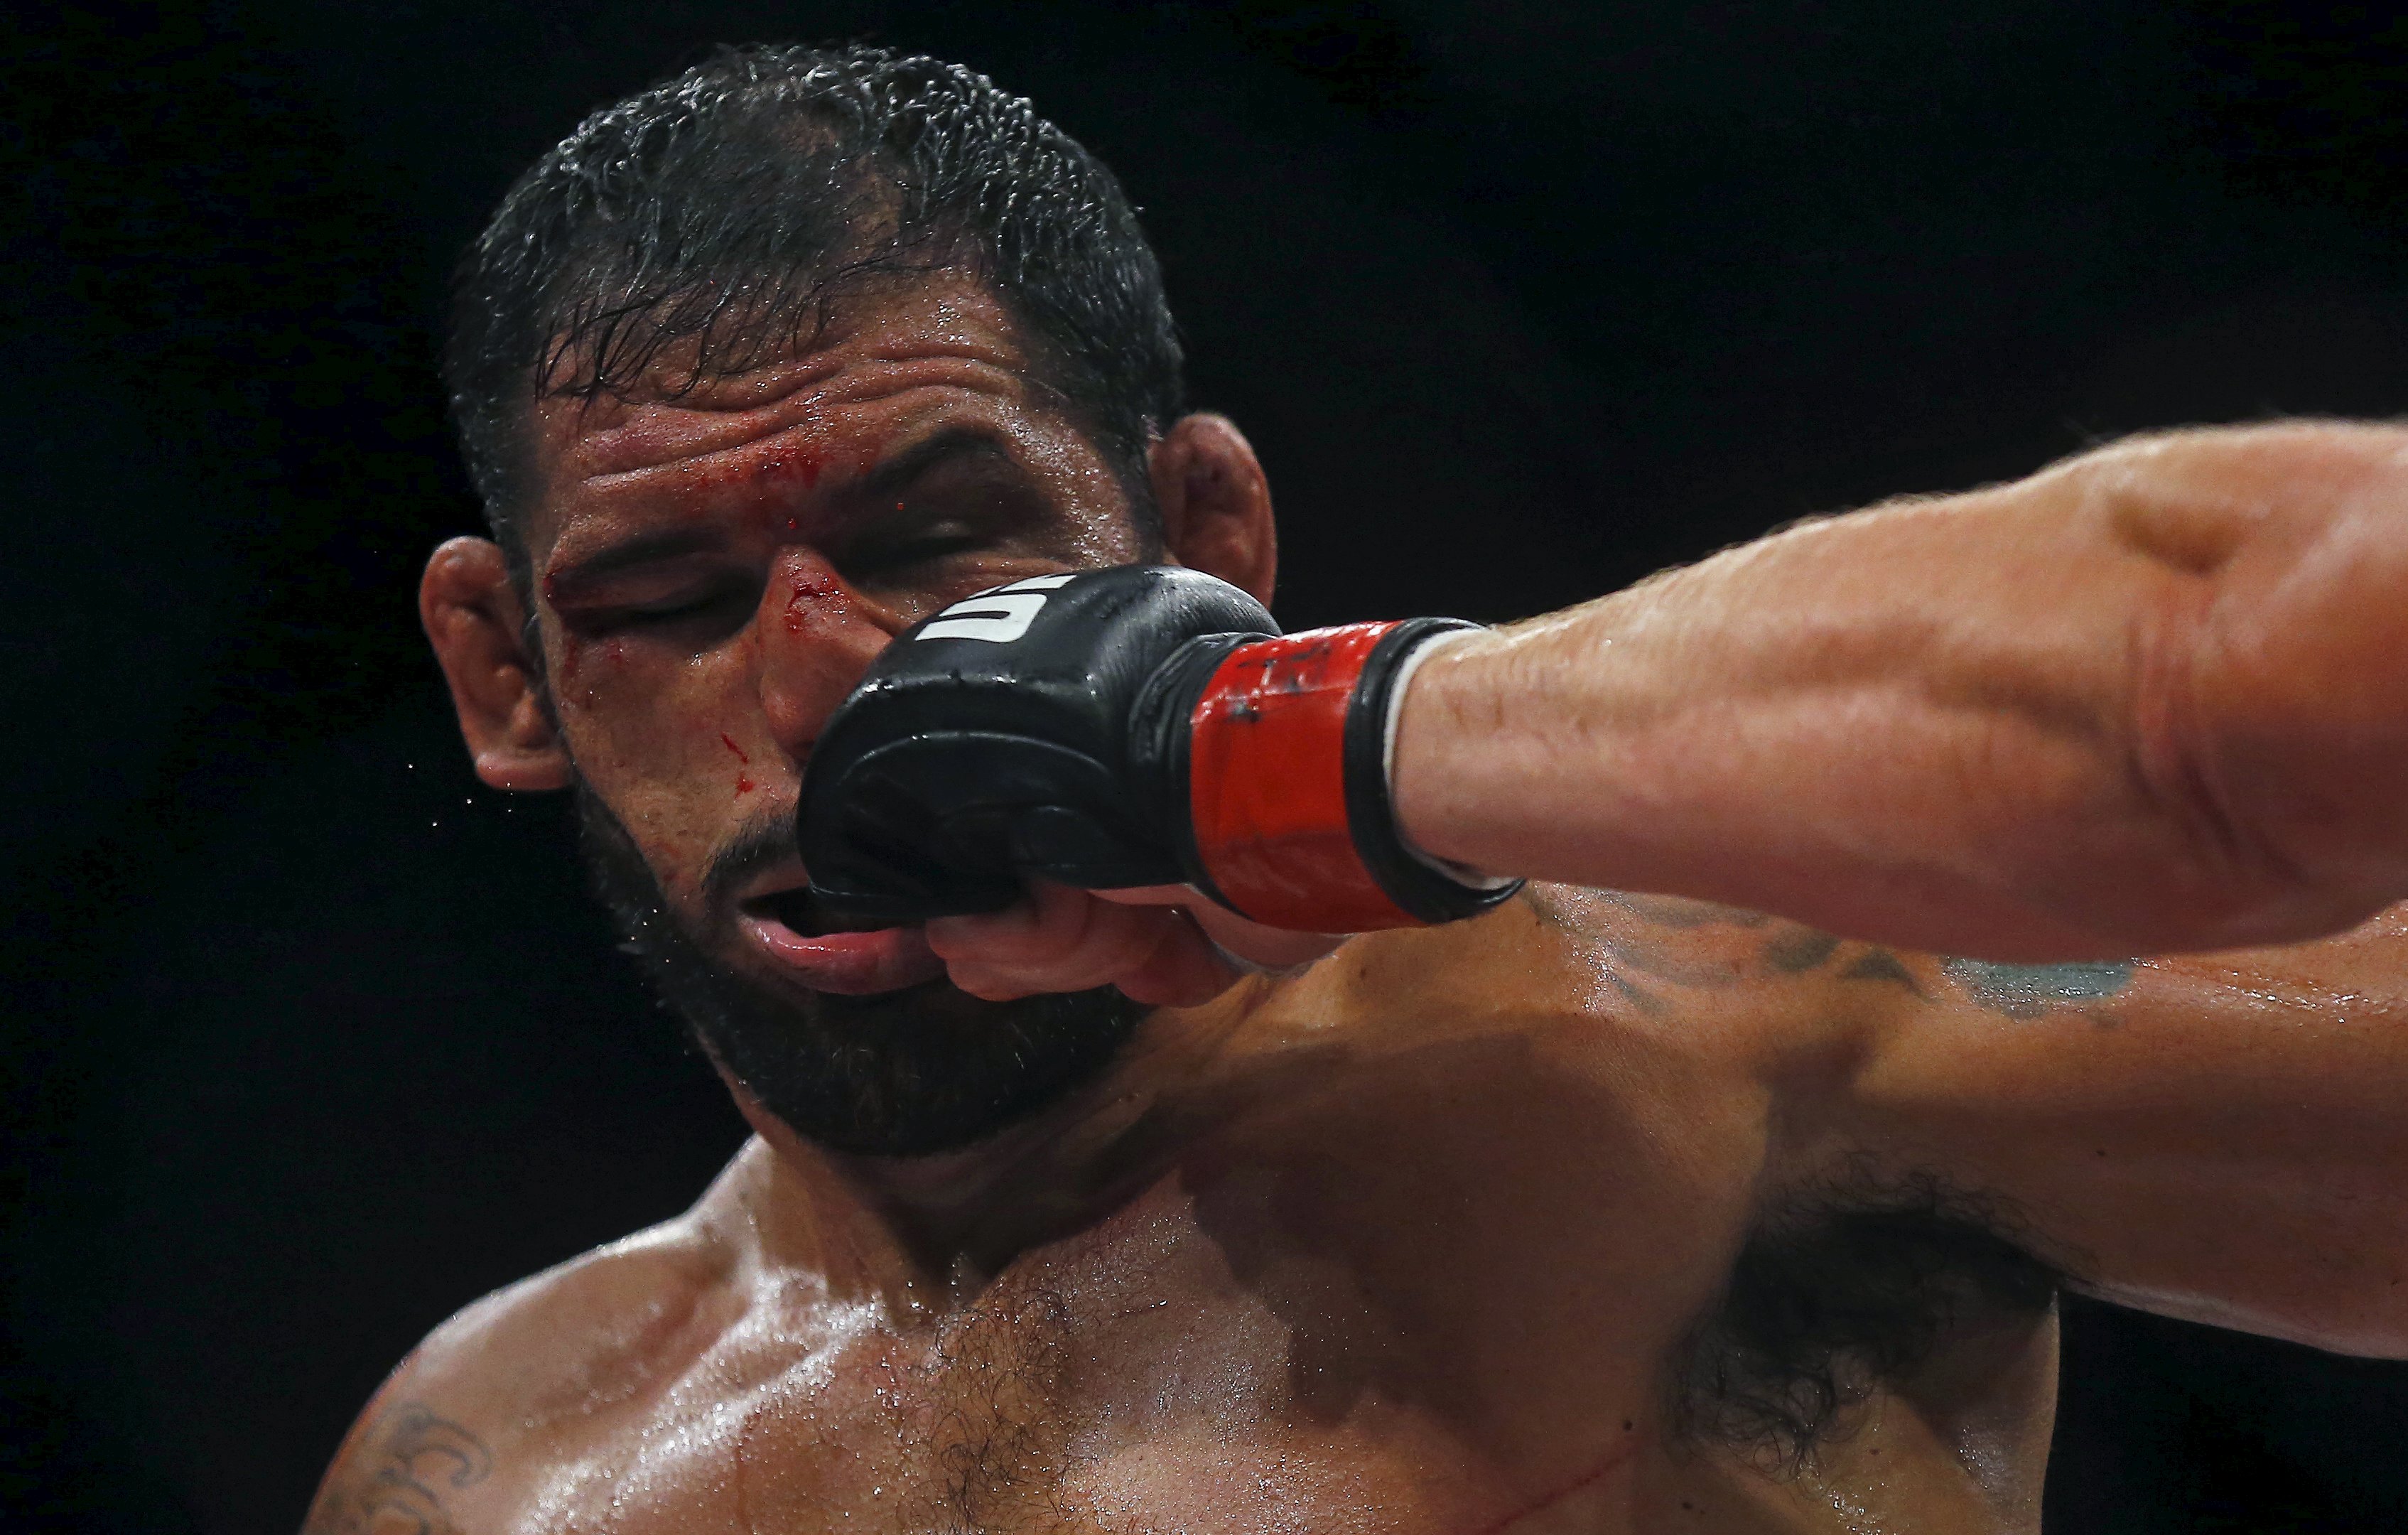 Minotauro Nogueira (L) of Brazil receives a punch during a fight against Stefan Struve. (Reuters)